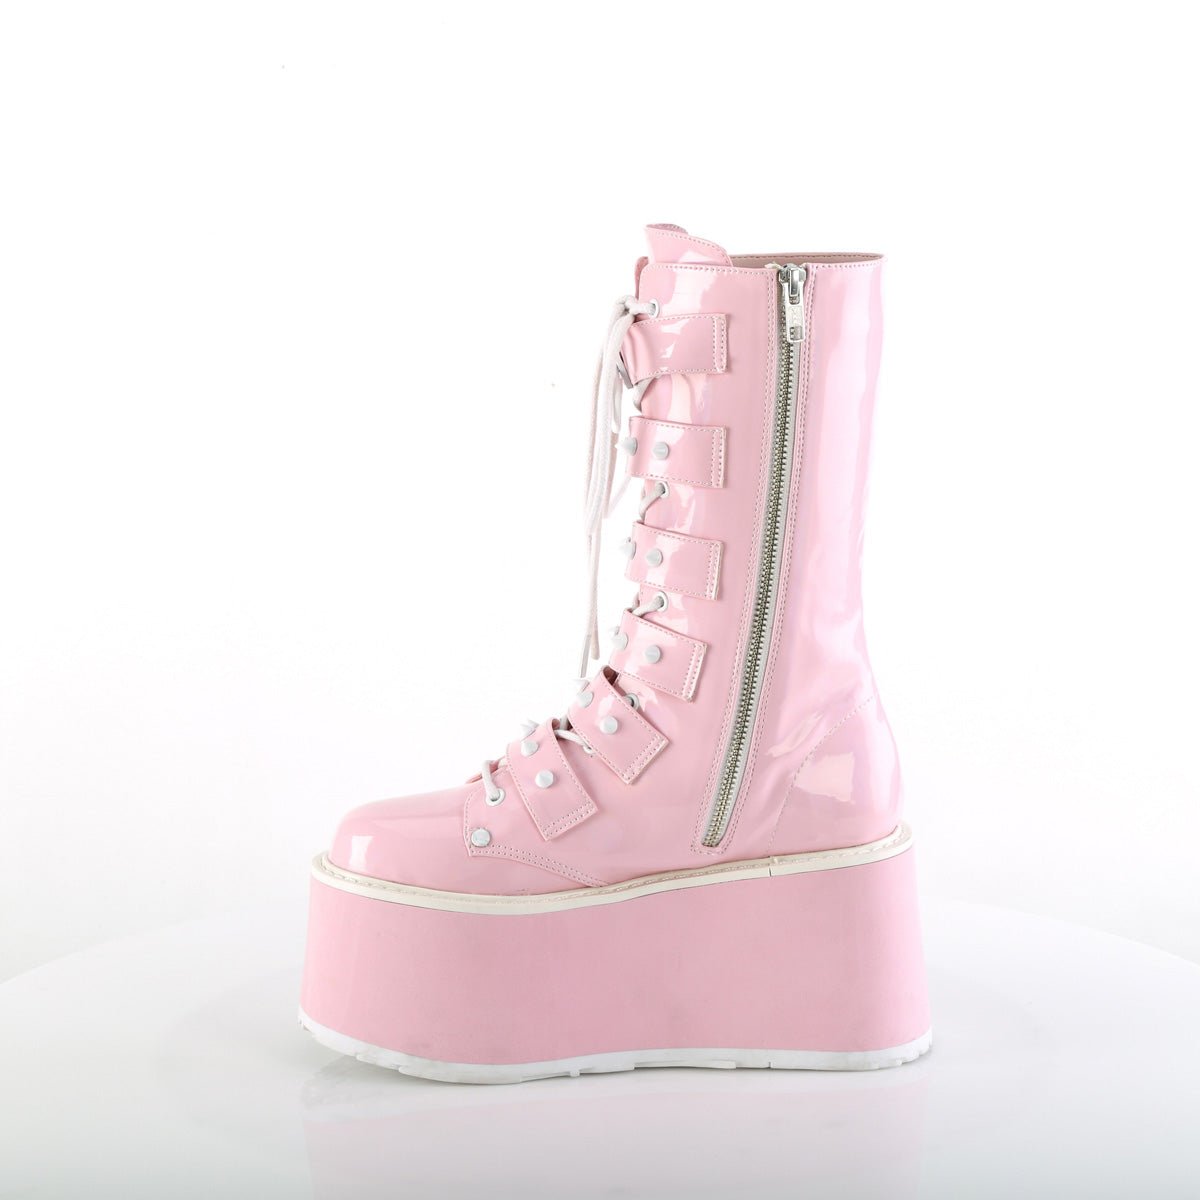 Too Fast | Demonia Damned 225 | Baby Pink Hologram Patent Women&#39;s Mid Calf Boots